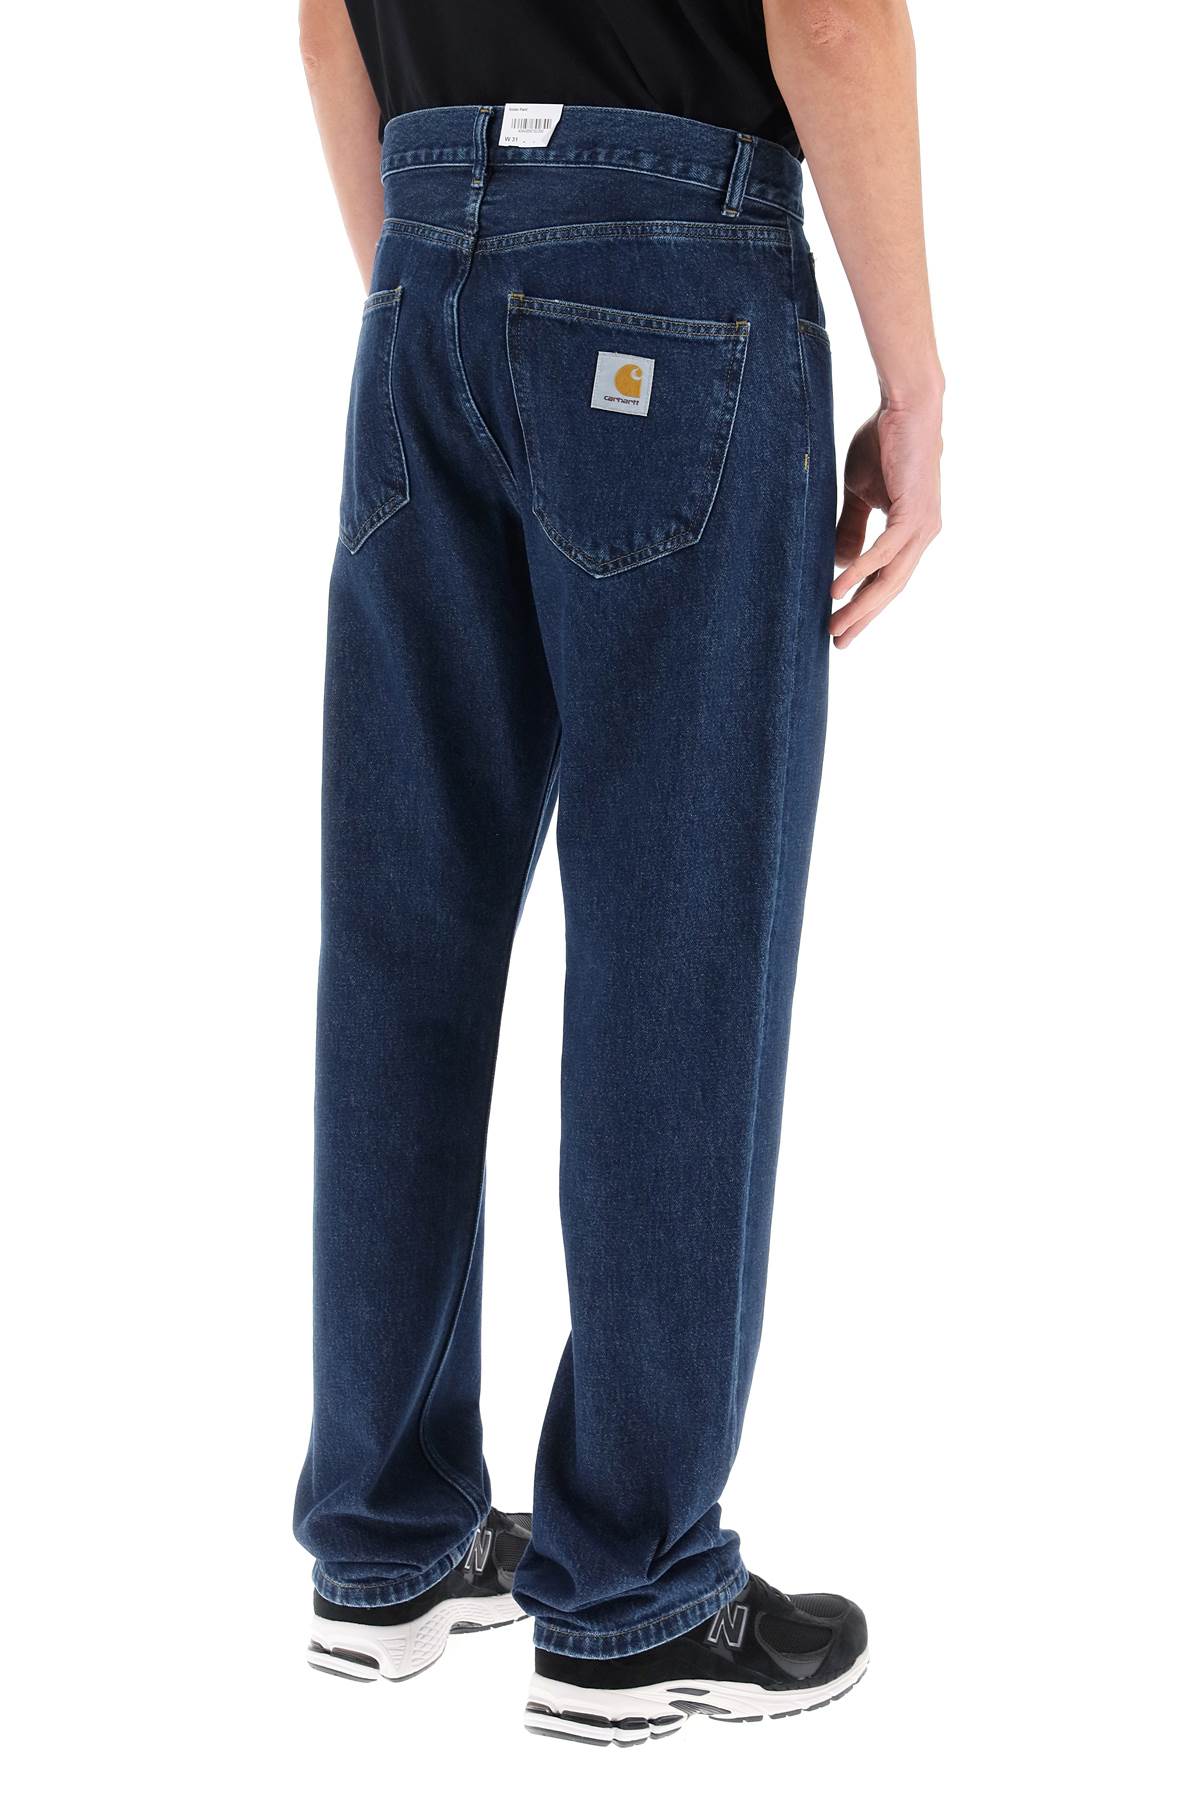 Carhartt wip nolan relaxed fit jeans-2